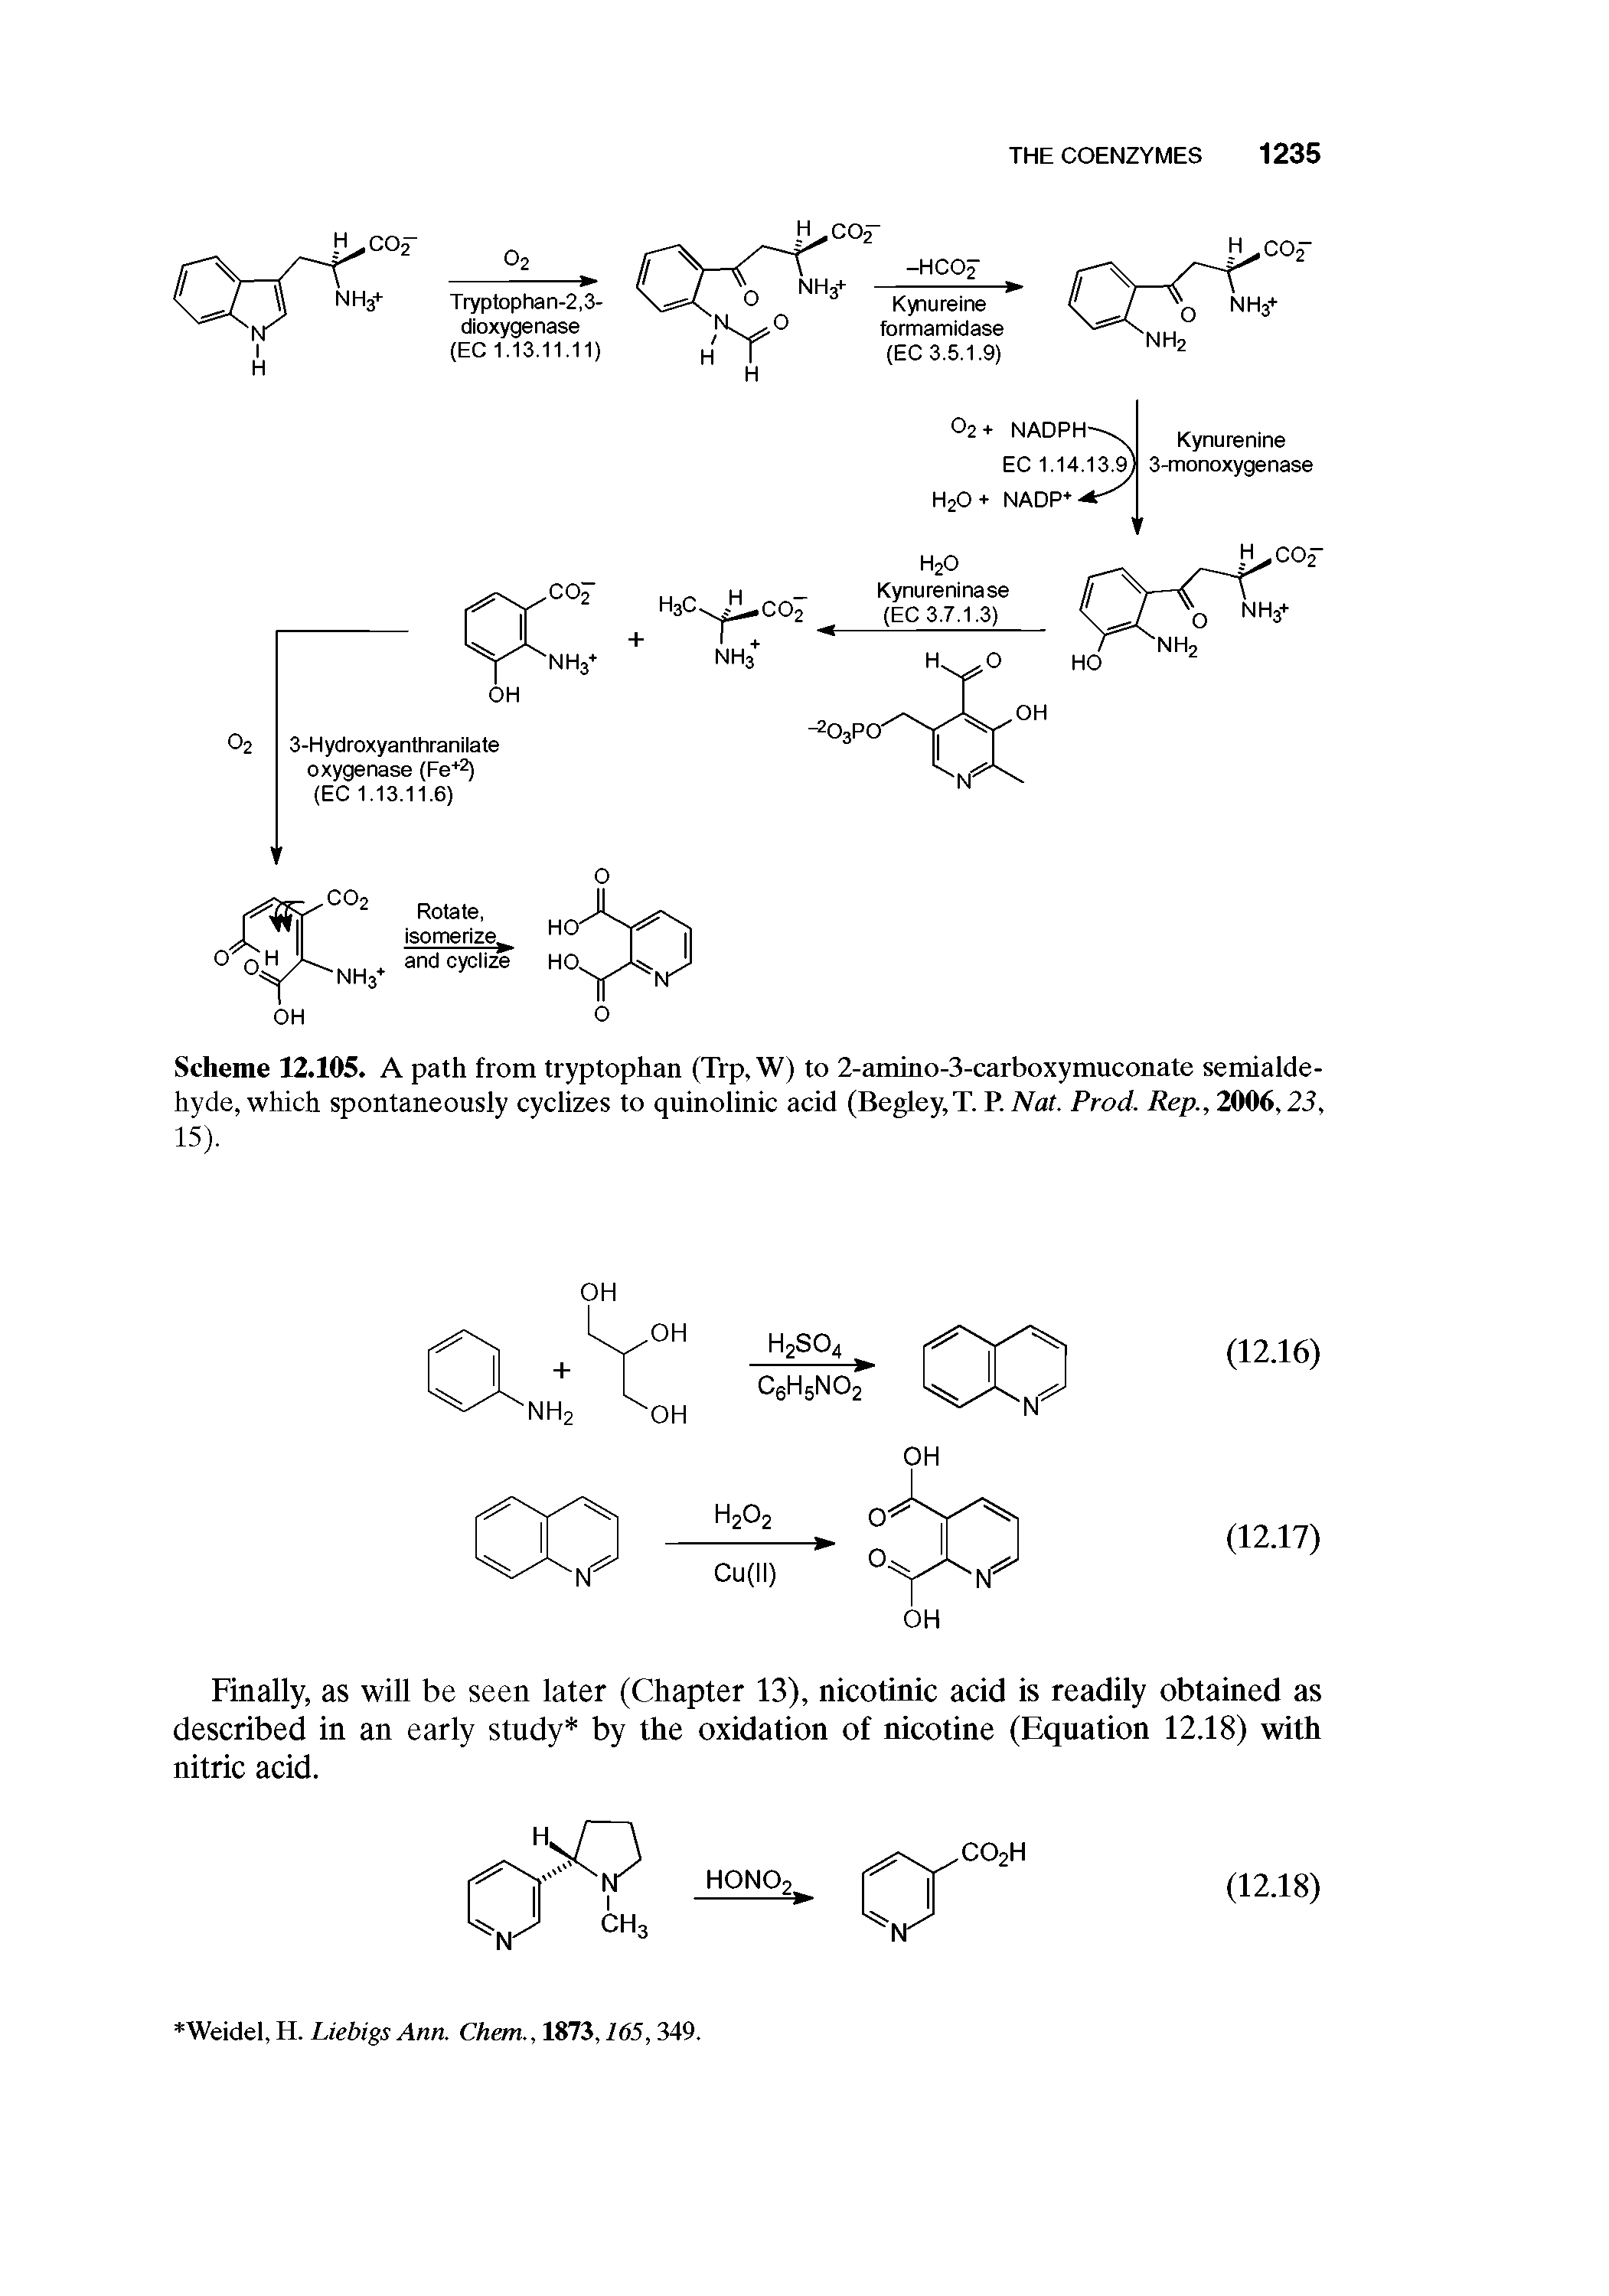 Scheme 12.105. A path from tryptophan (Trp, W) to 2-amino-3-carboxymuconate semialdehyde, which spontaneously cyclizes to quinolinic acid (Begley,T. P. Nat. Prod. Rep., 2006,23,...